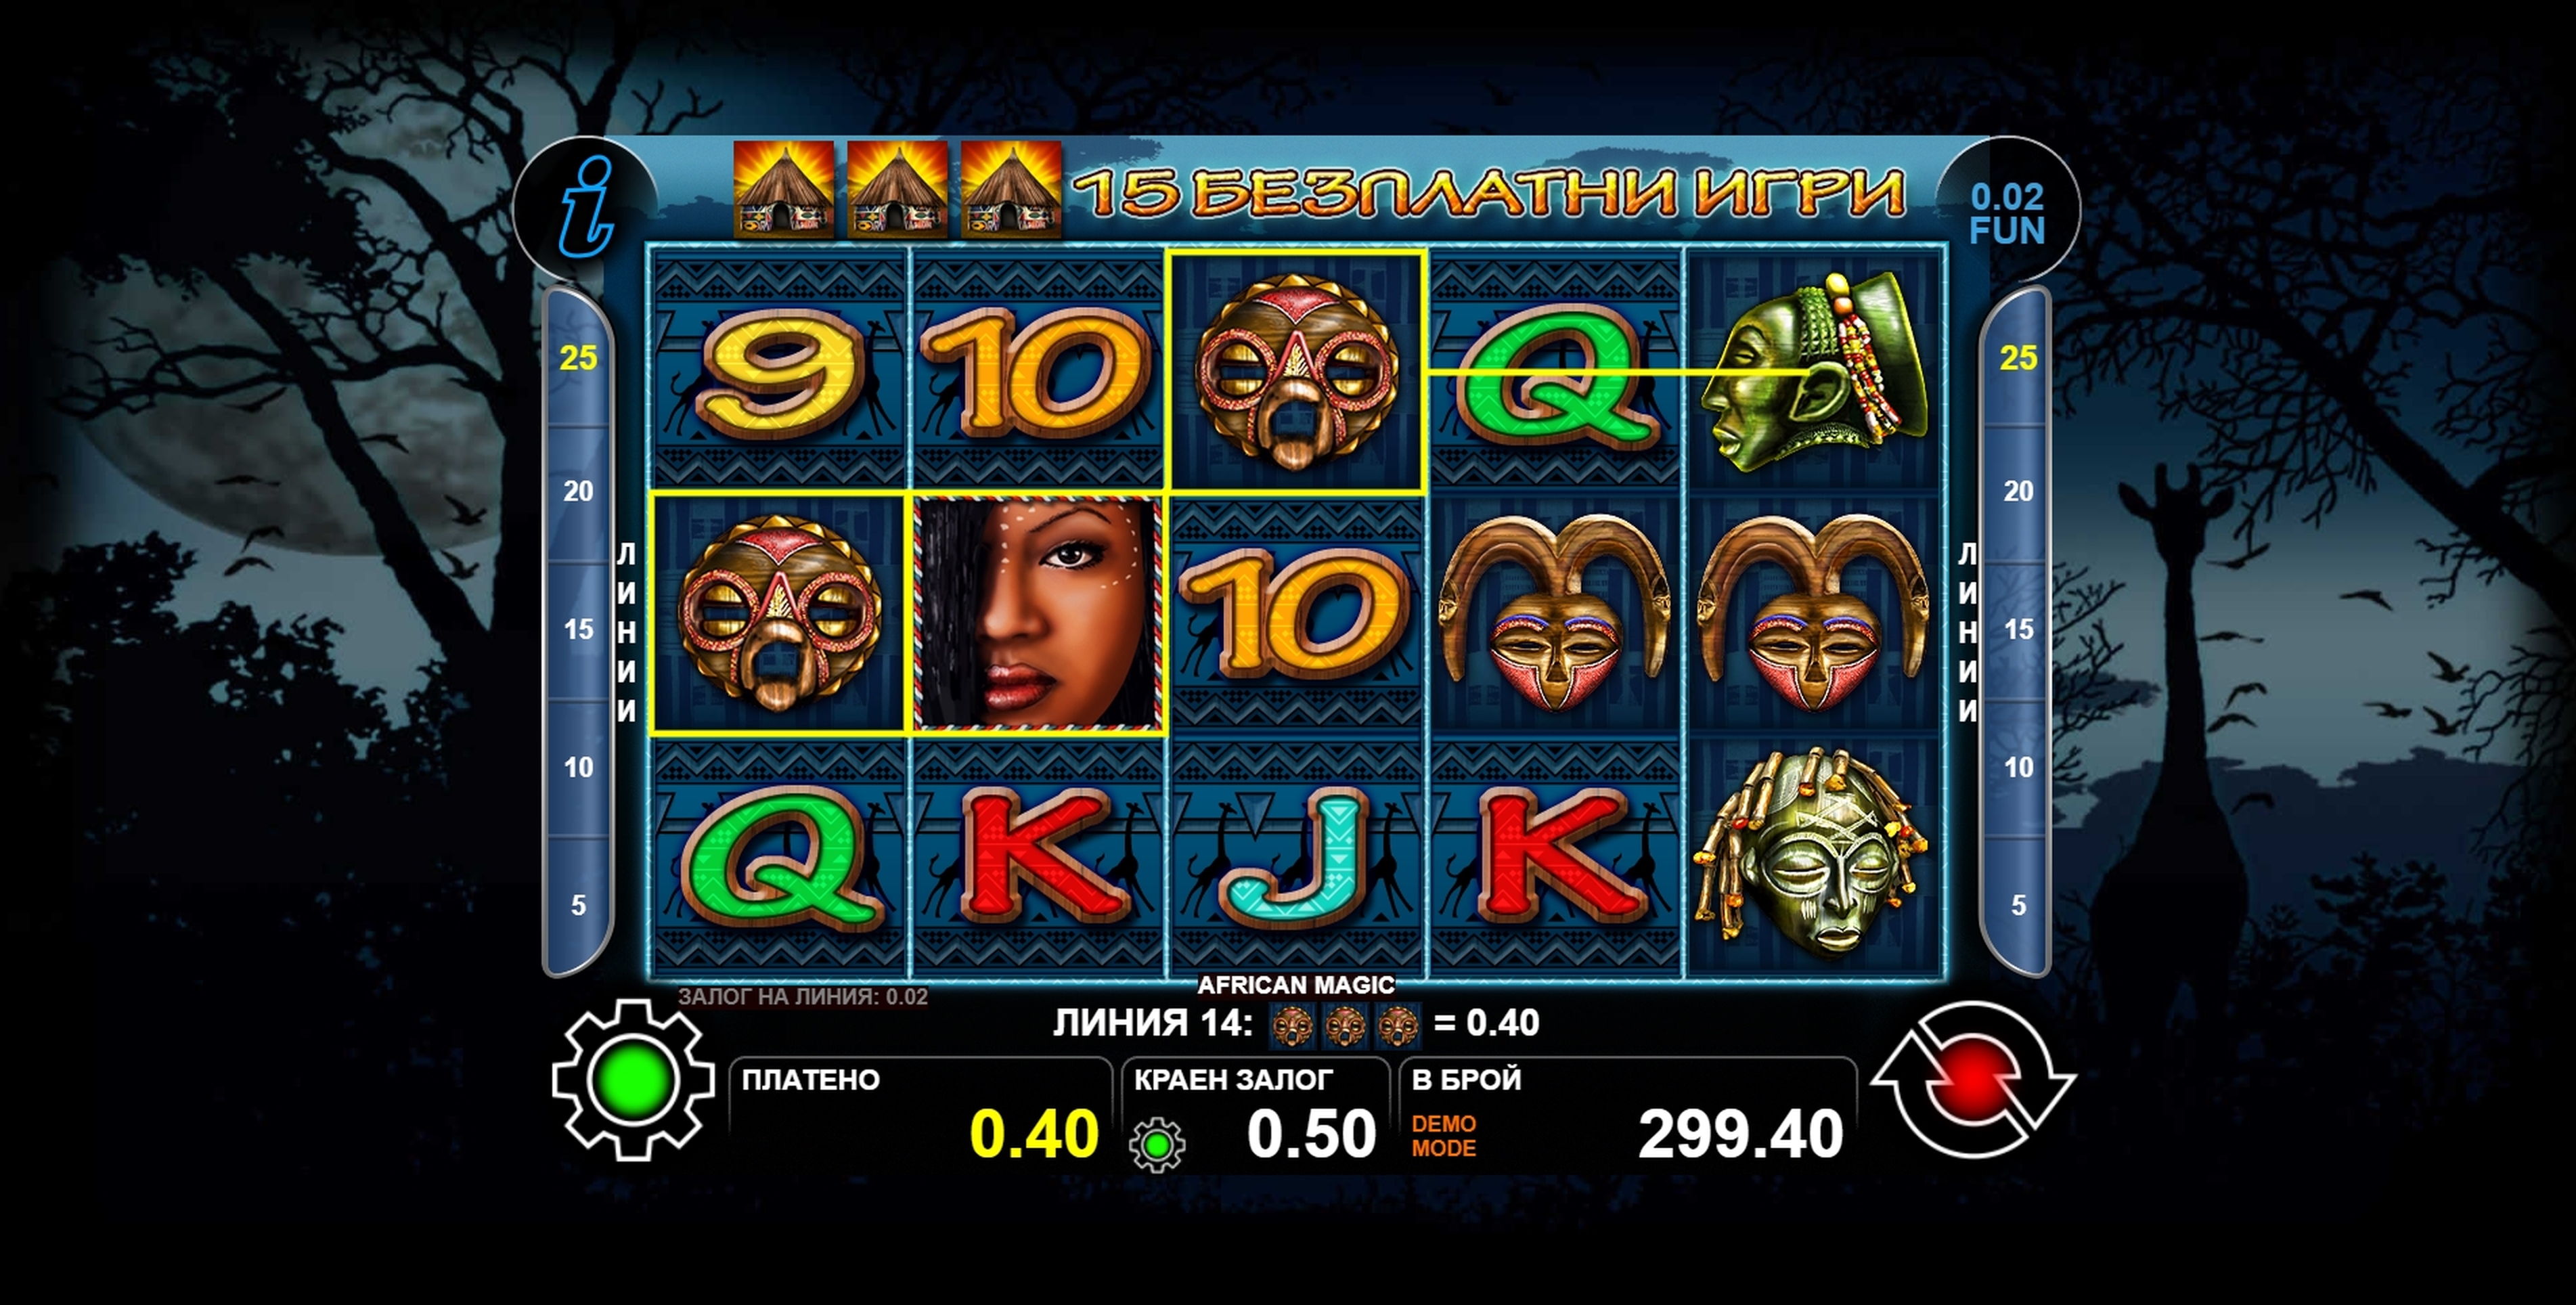 Win Money in African Magic Free Slot Game by casino technology